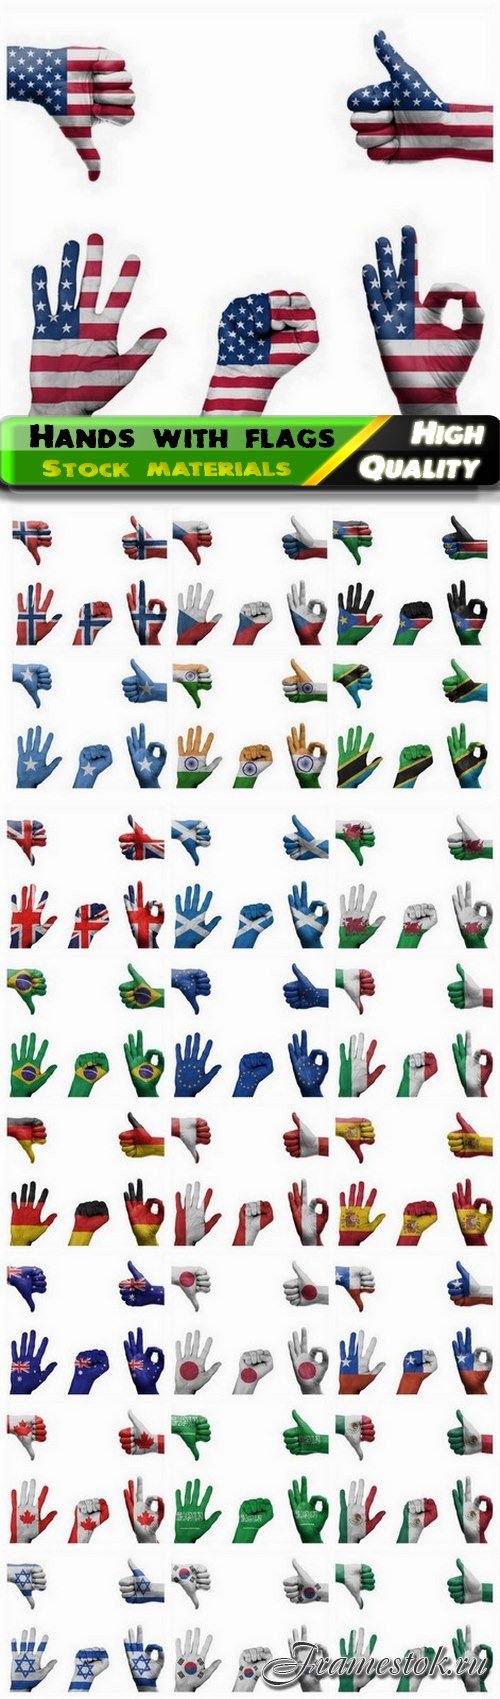 Human hands with different country flags - 25 HQ Jpg